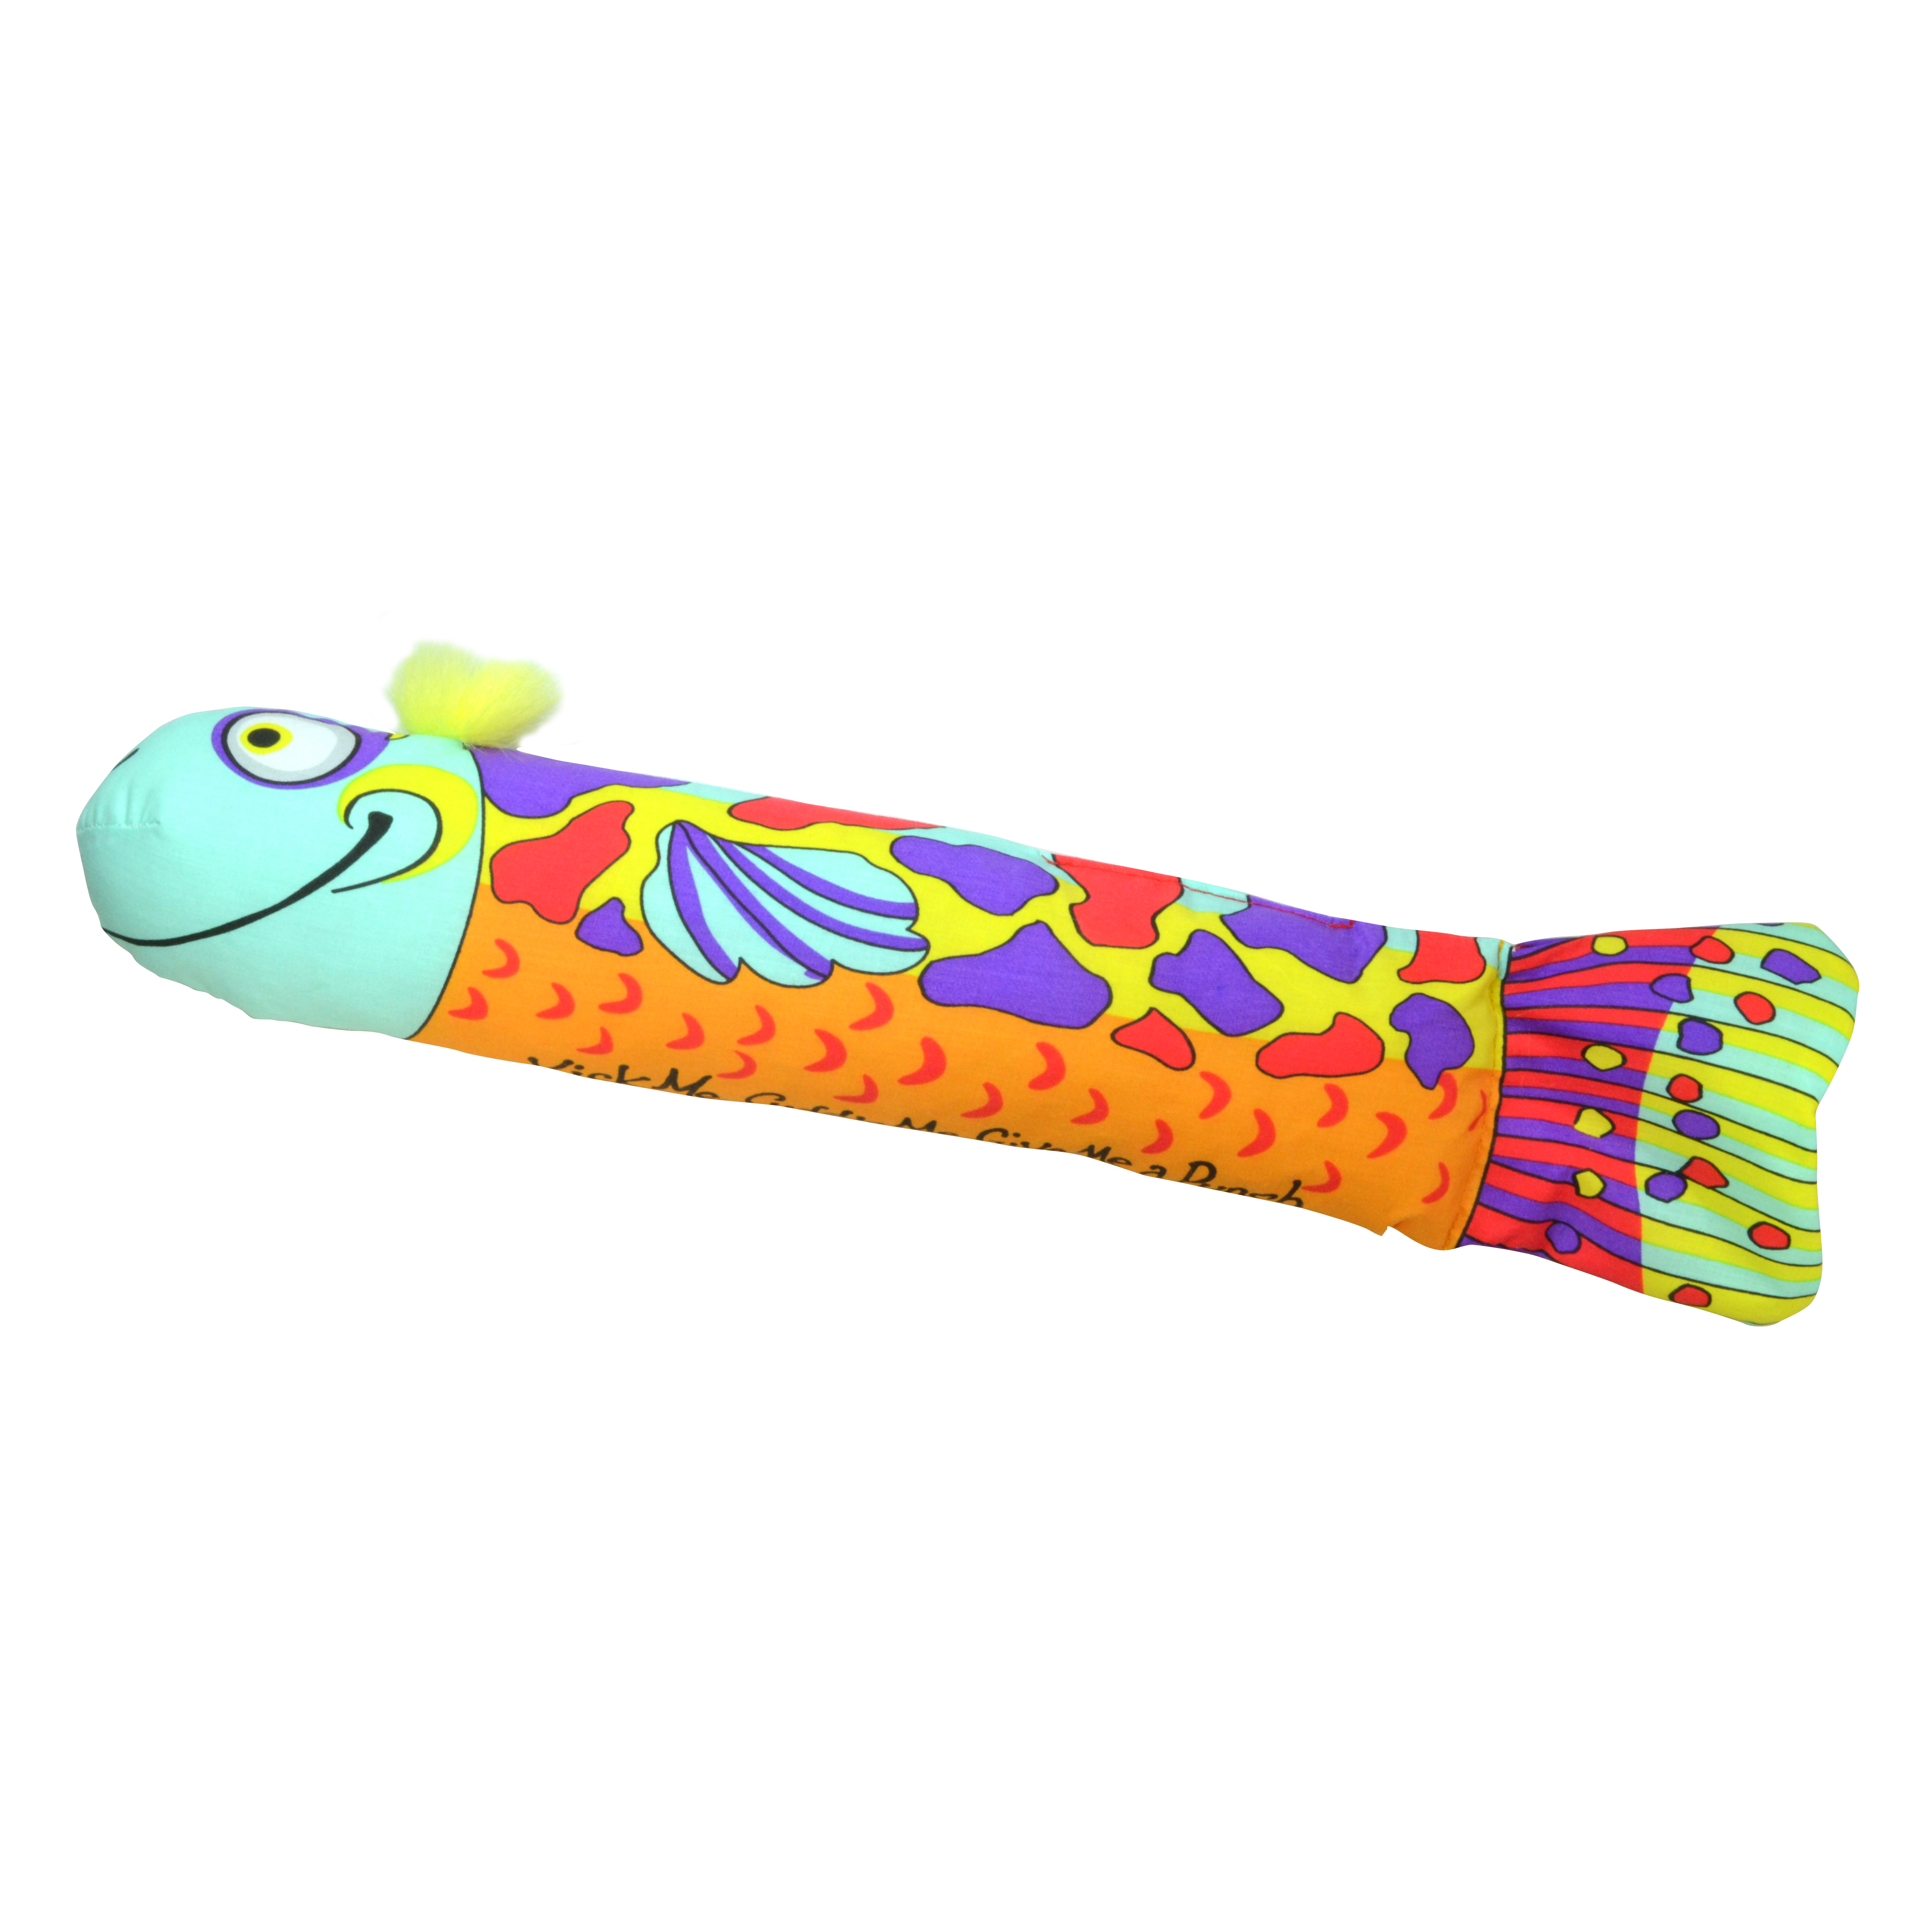 Petstages Madcap Crunch and Wrestle Fish, Multi, One-Size - image 1 of 4